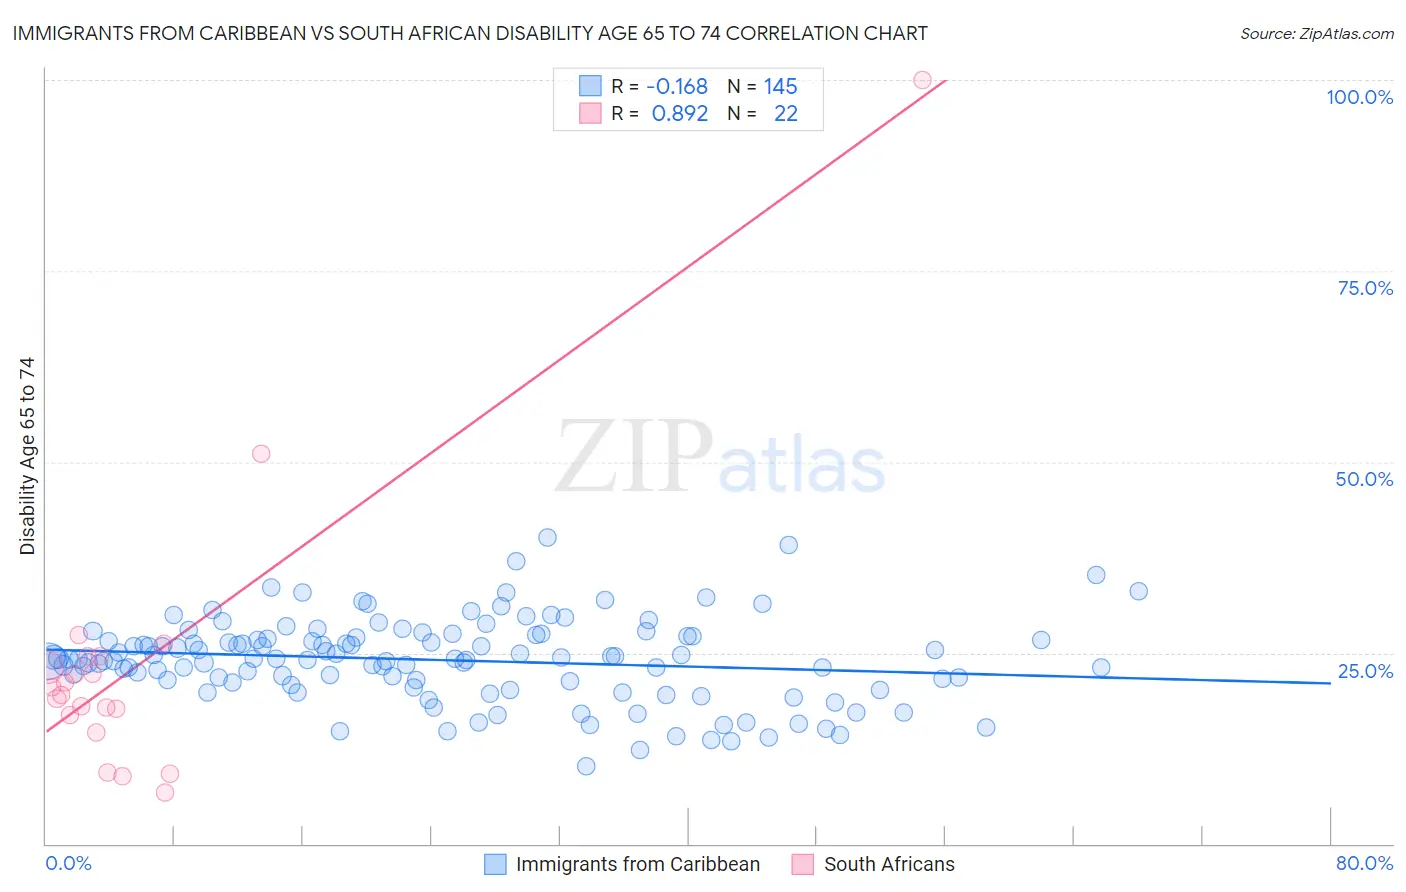 Immigrants from Caribbean vs South African Disability Age 65 to 74